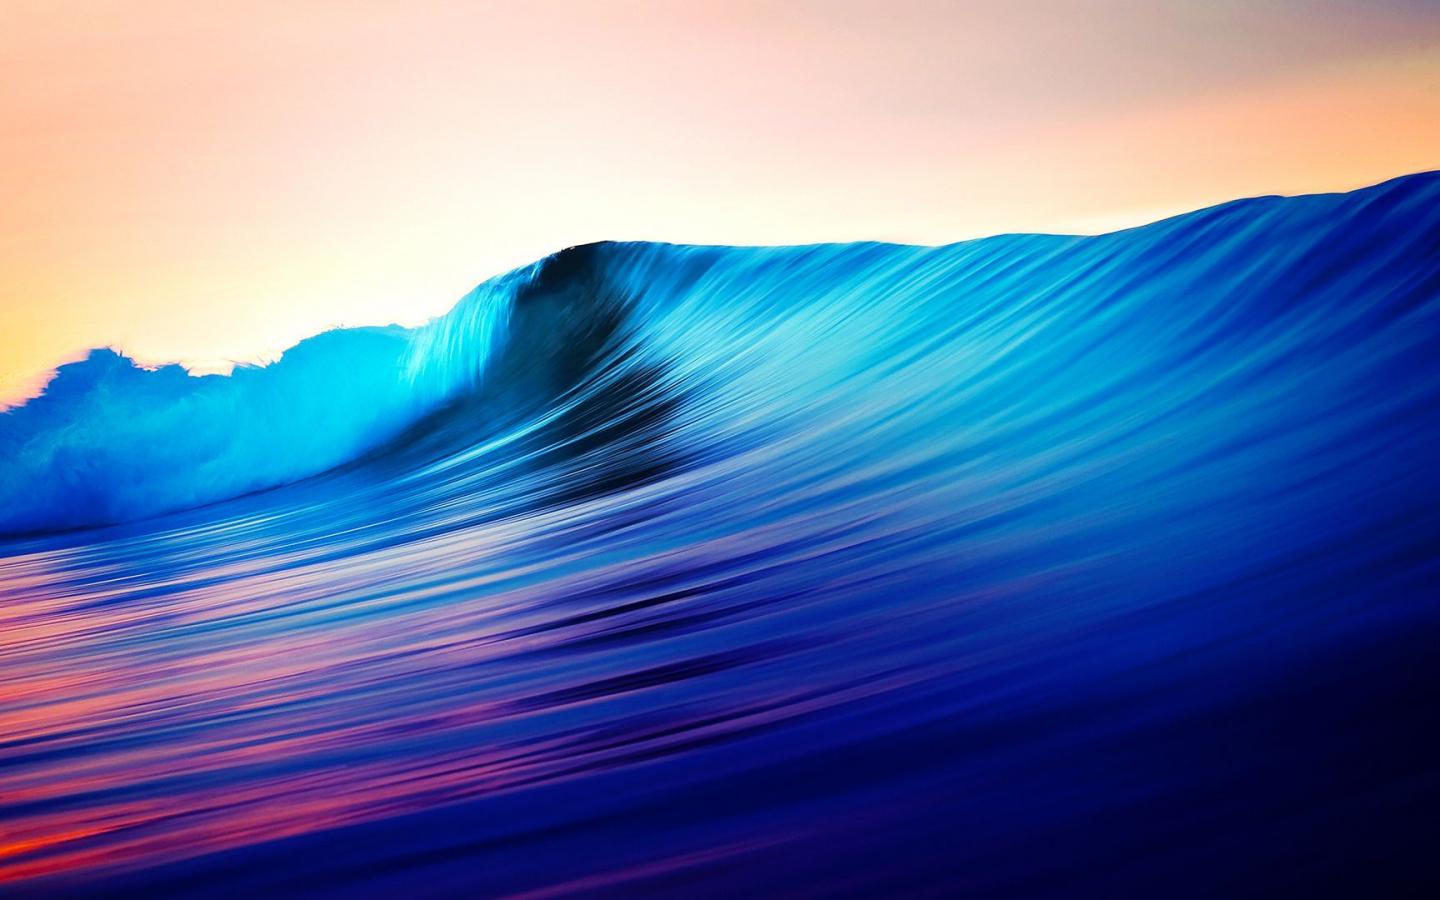 Colorful Wave Wallpapers - Top Free Colorful Wave Backgrounds ...